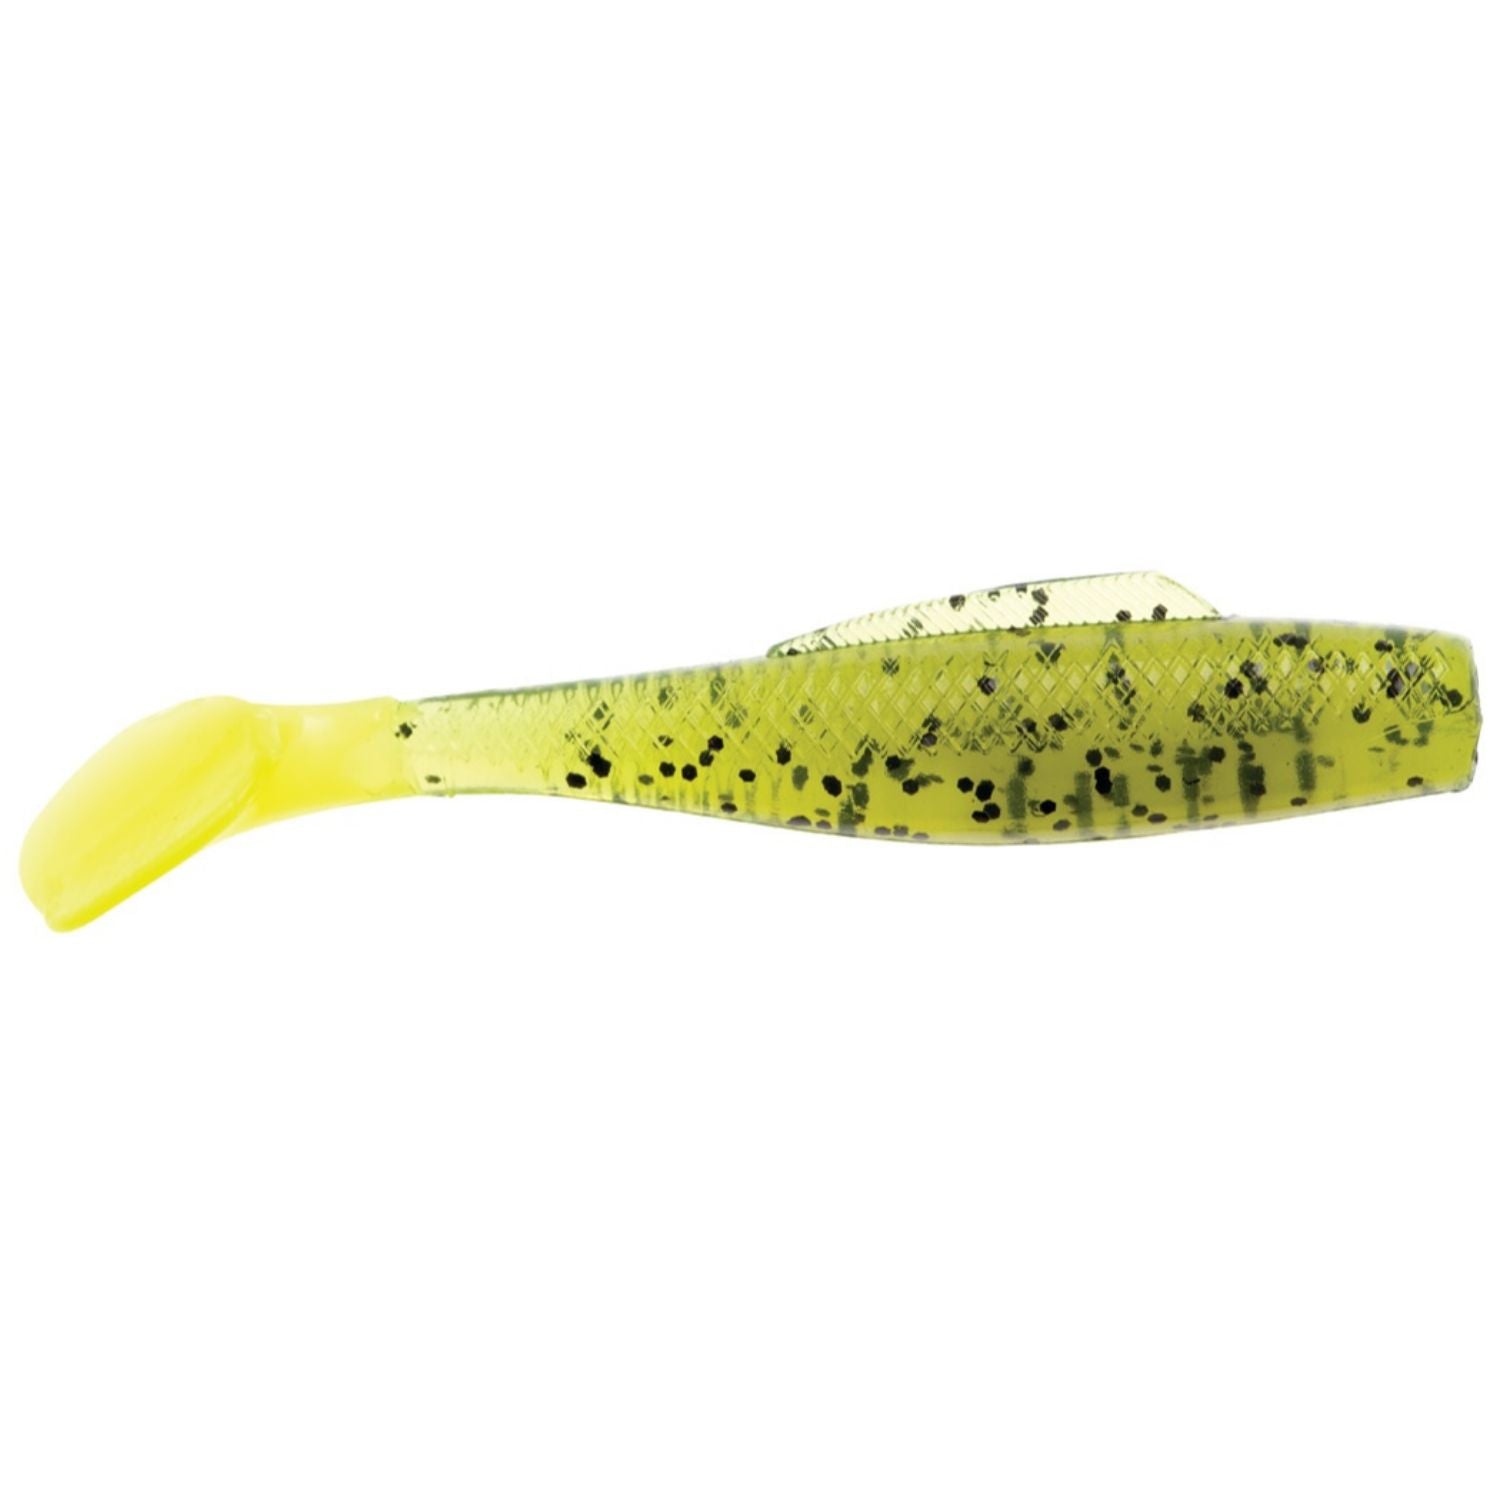 Watermelon Chartreuse Tail 6 Pk Zman Fresh & Saltwater Minnowz from Fish On  Outlet